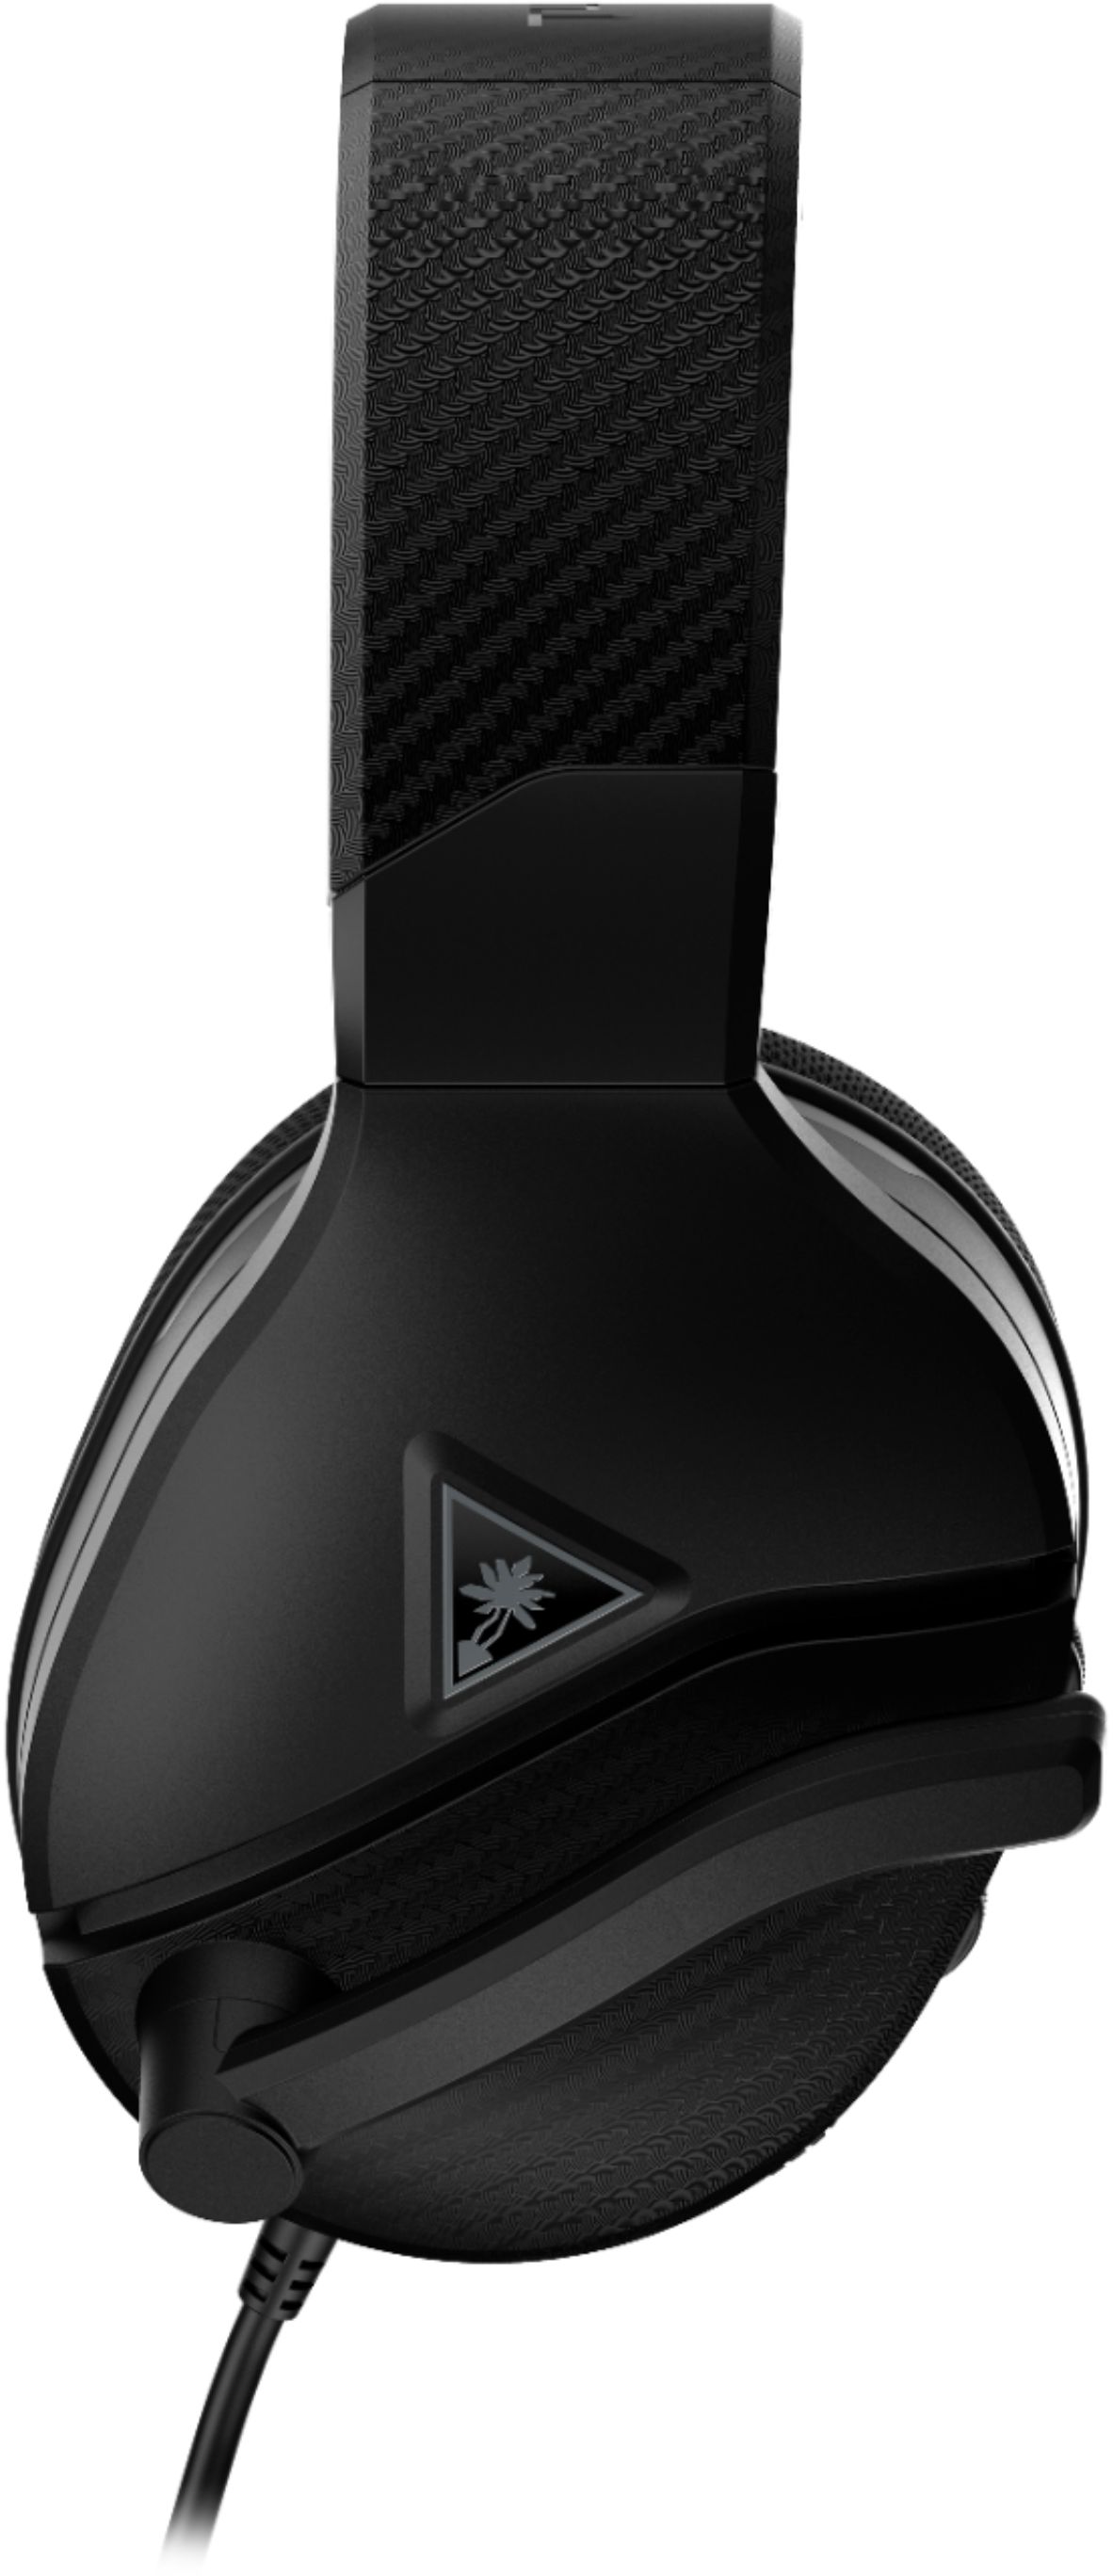 Turtle Beach Recon 200 Gen 2 Powered Gaming Headset for Xbox One